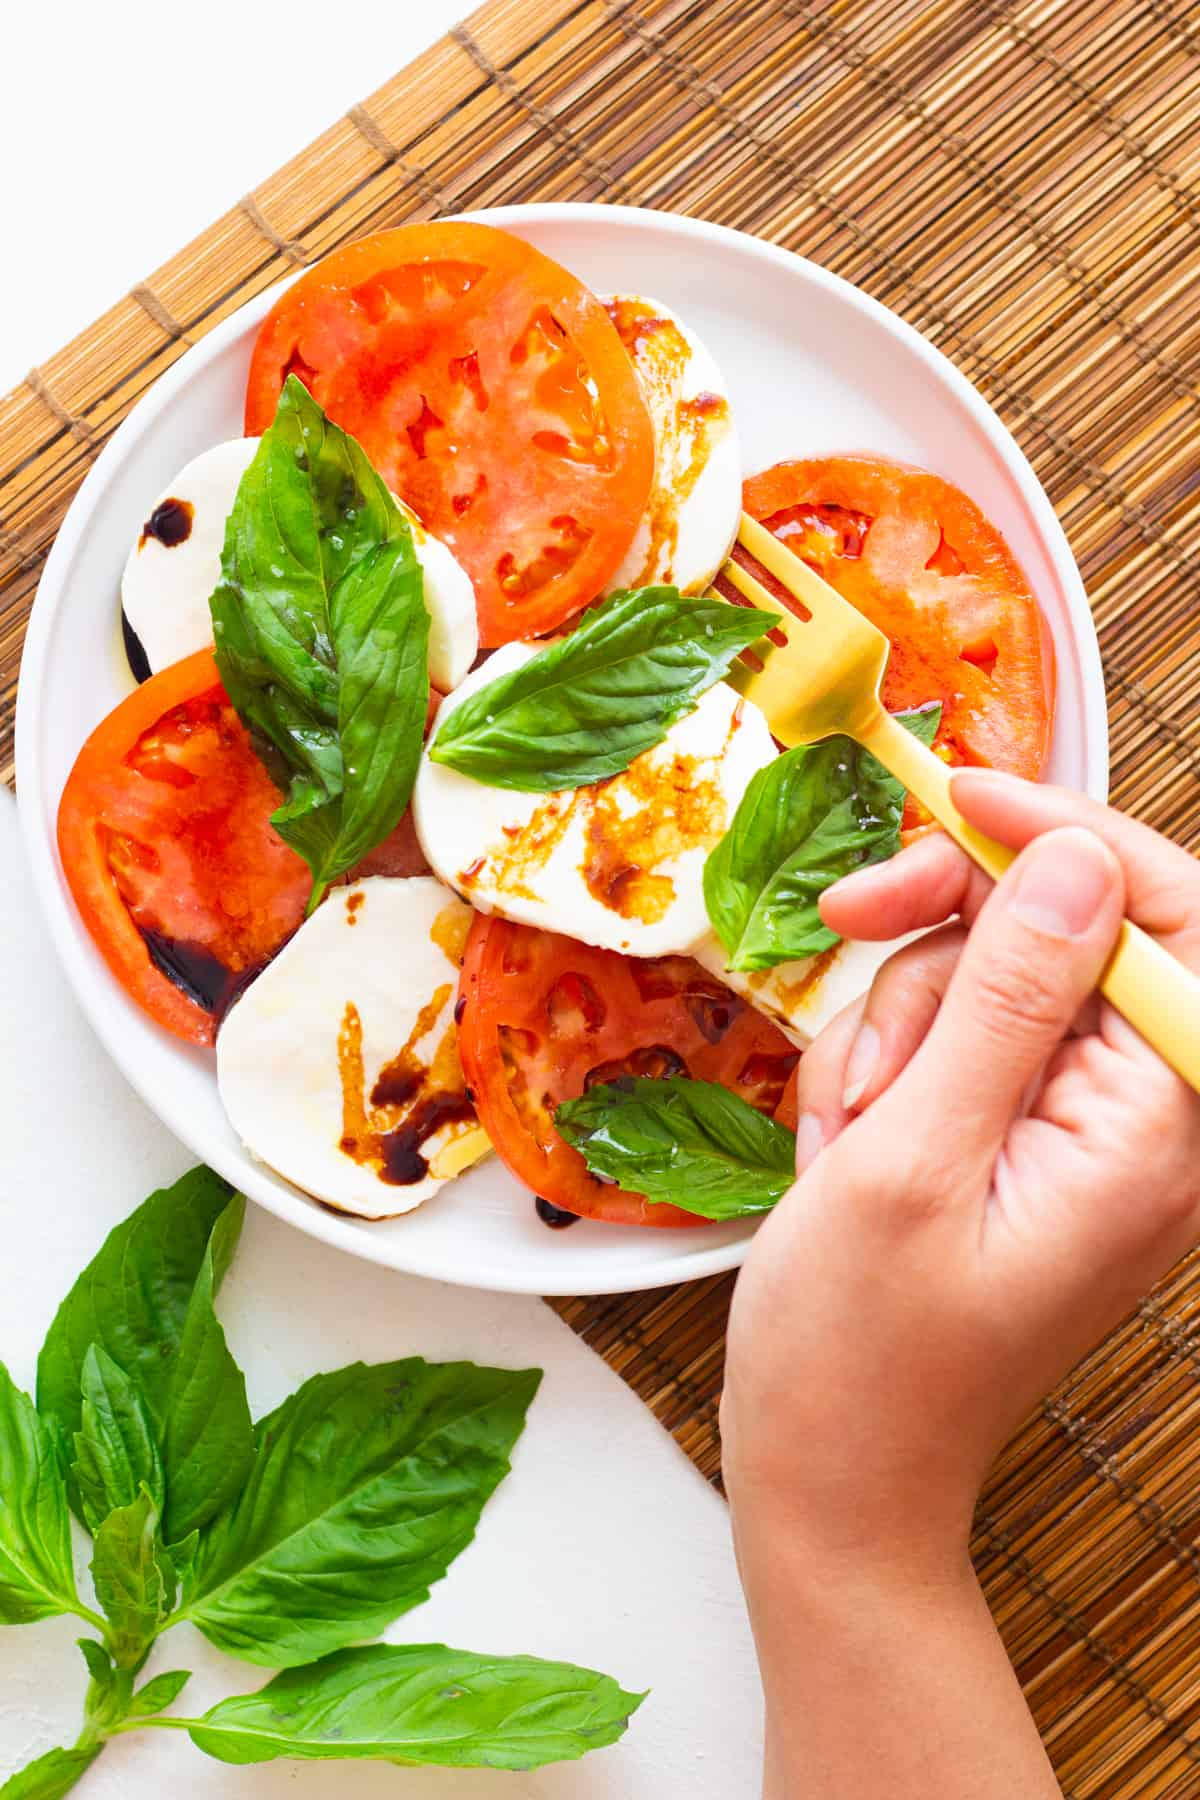 This caprese salad recipe is an Italian classic made with fresh mozzarella and juicy tomatoes. It takes only 10 minutes to make this salad and fresh and quality ingredients is the key to its great flavor.  
